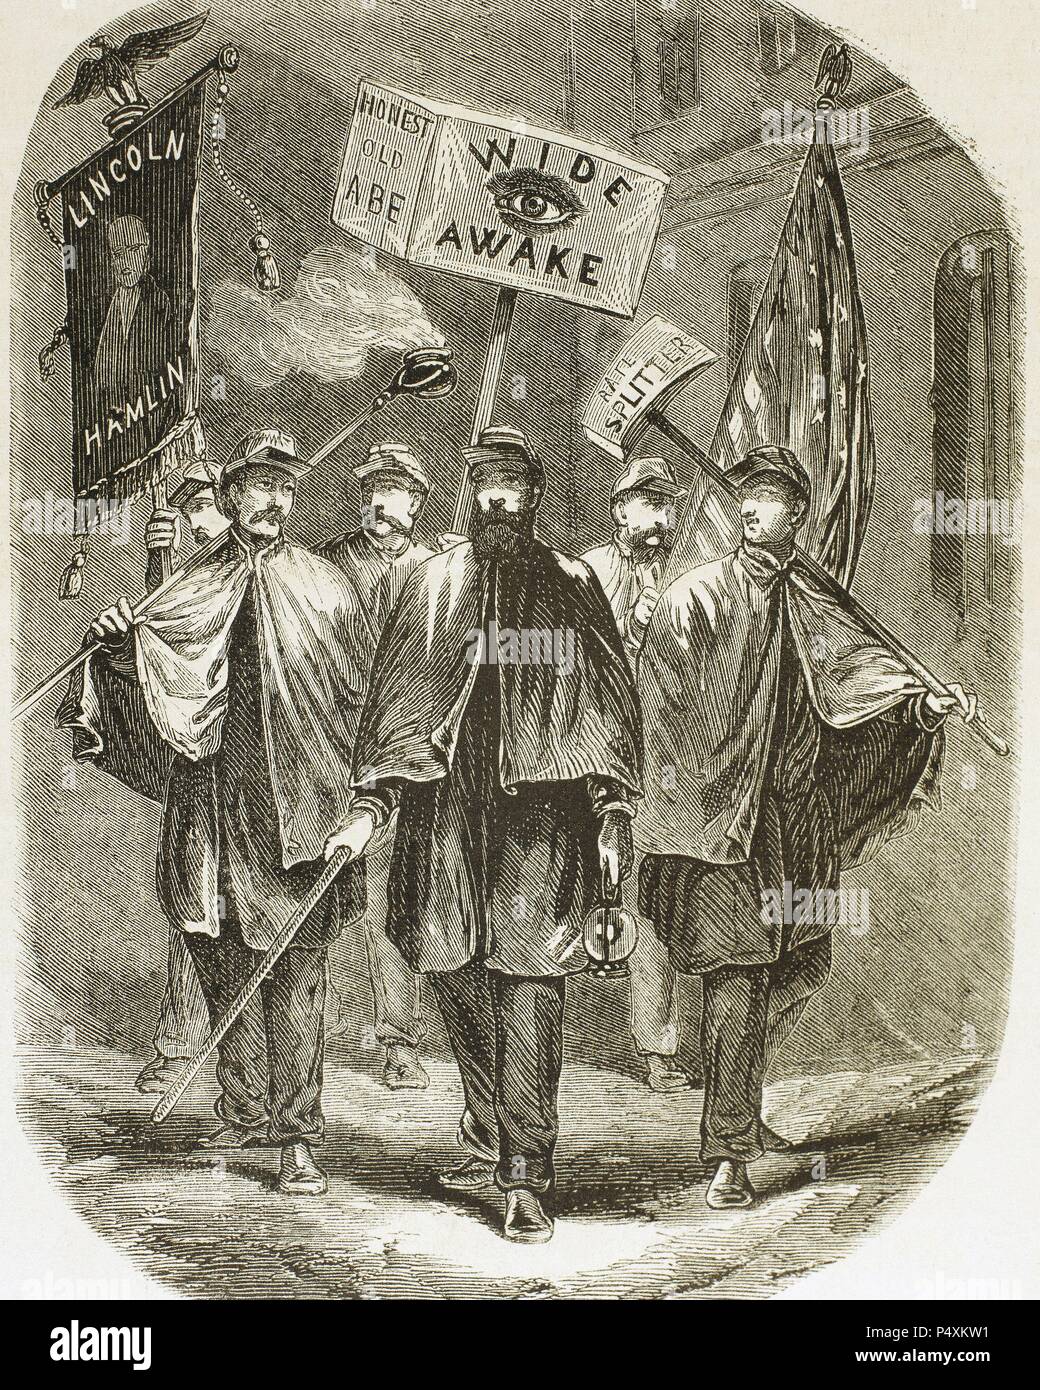 United States. Supporters of Abraham Lincoln, candidate of the Republican Party. Engraving from 'L'Illustration Journal Universel', 1860. Stock Photo